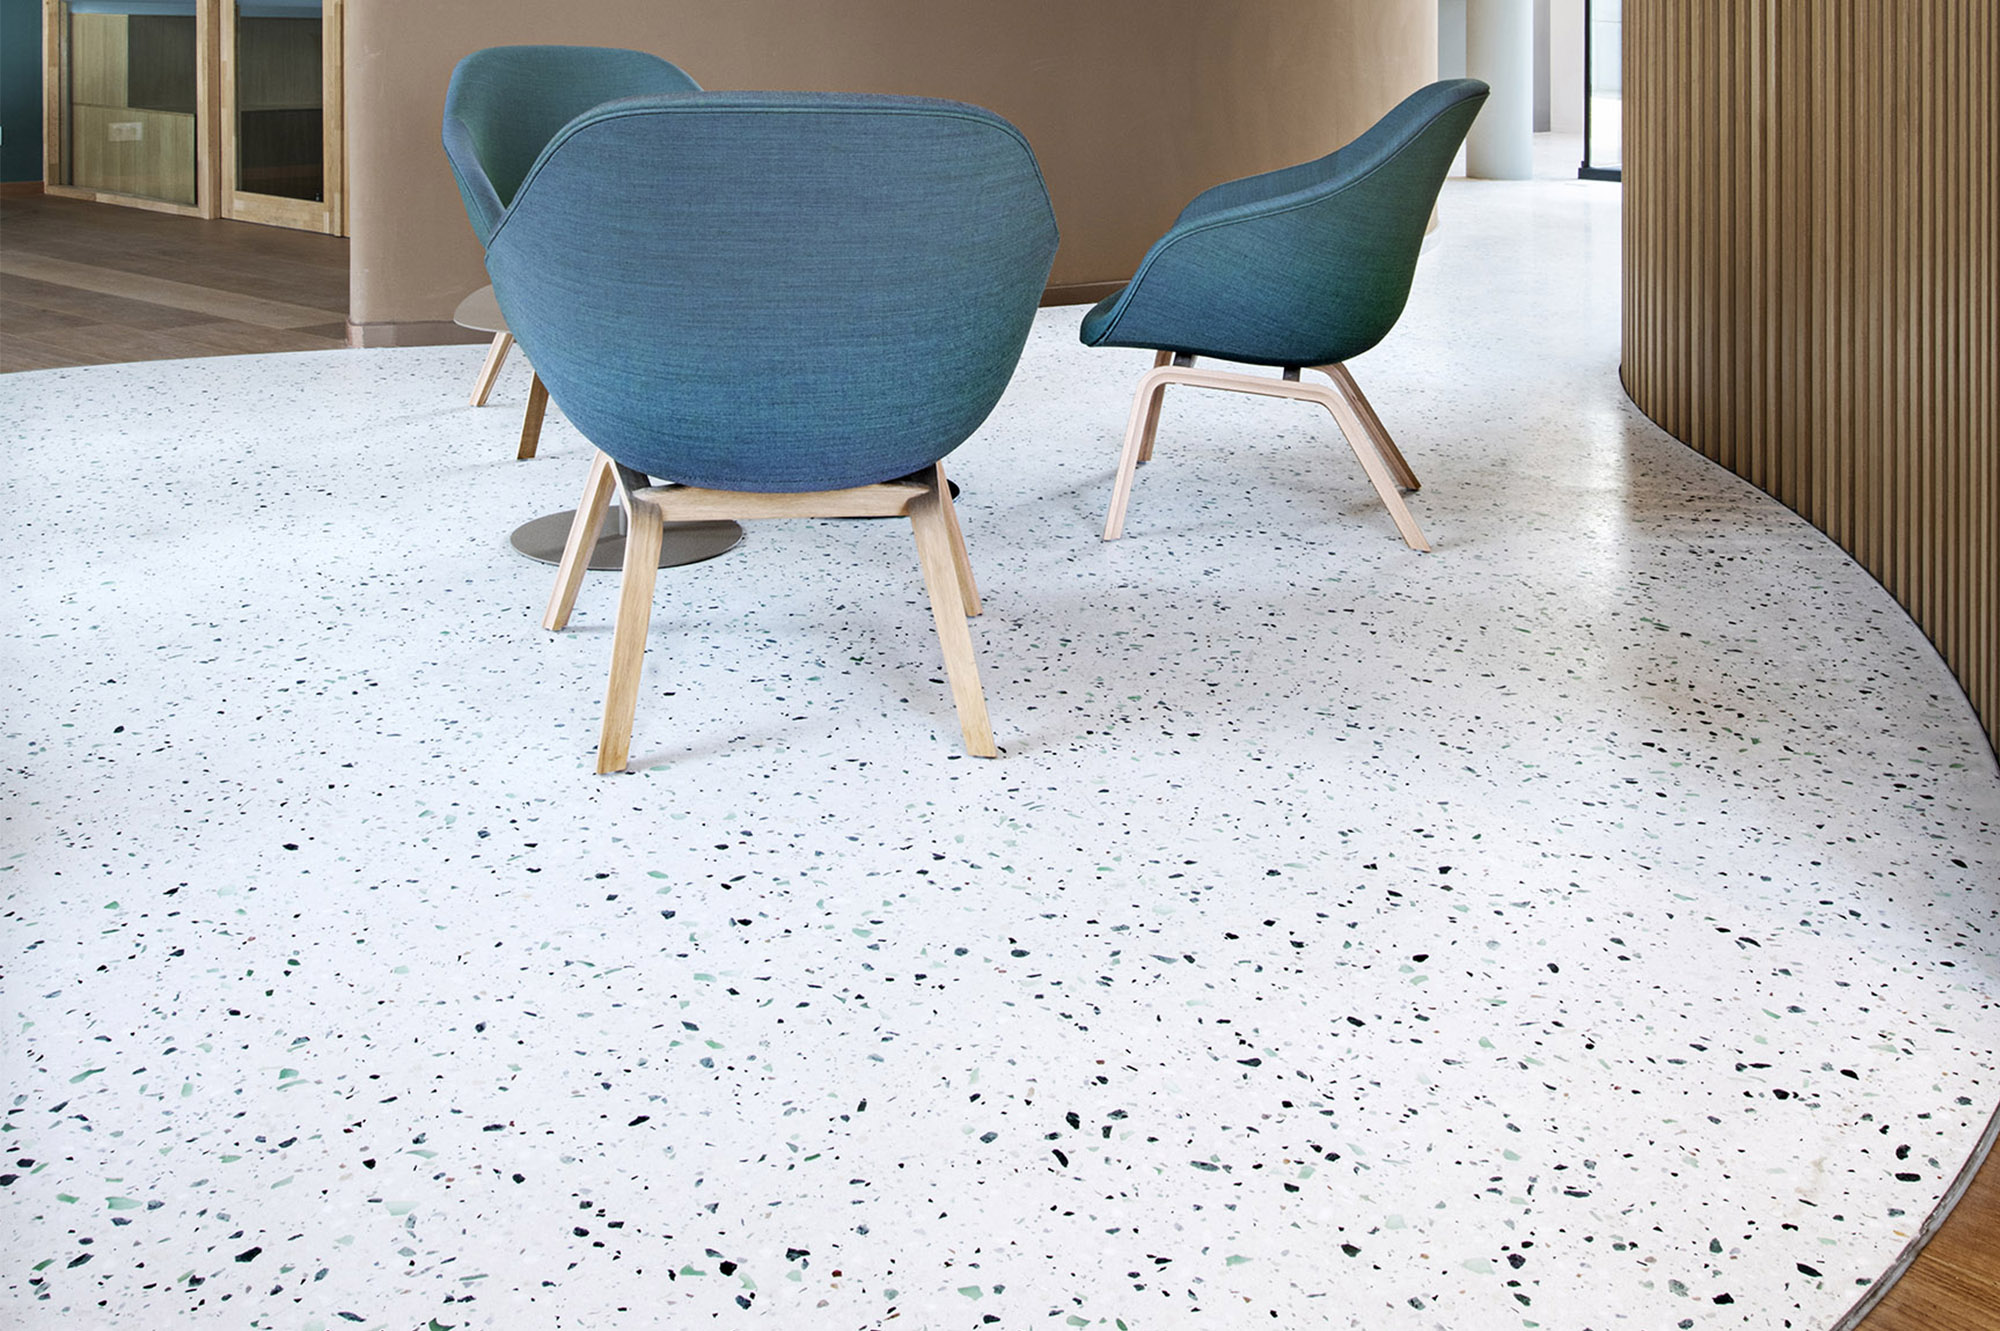 BEALSTONE® Terrazzo, aesthetics and technicality to renovate your spaces